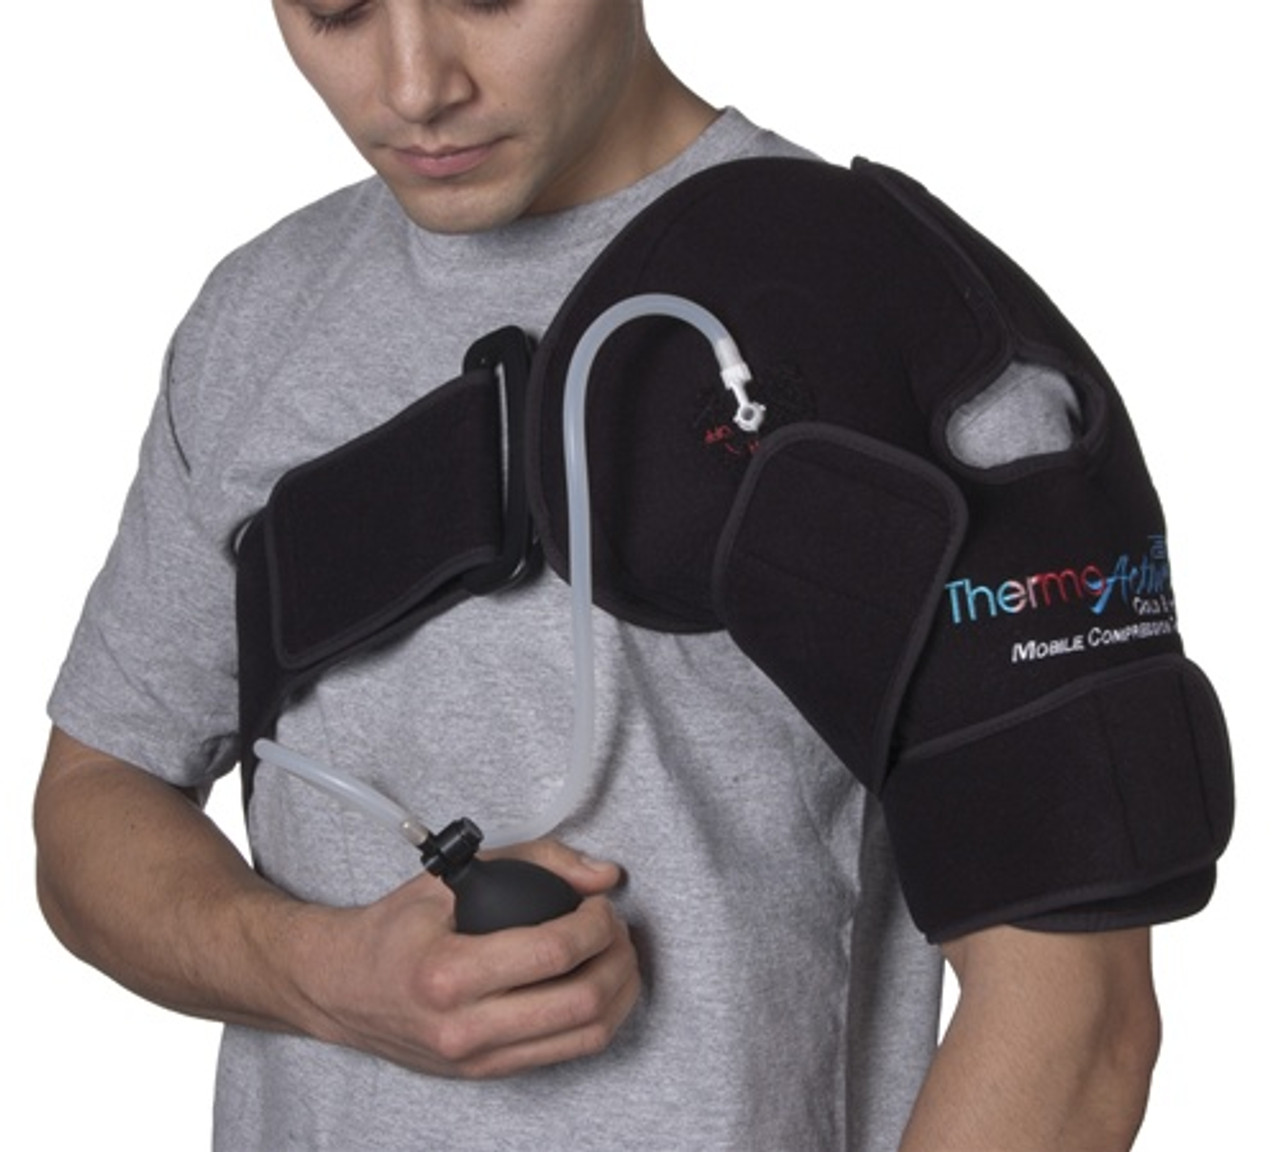 Shoulder Support Brace With Heat and Cold Temperature Control